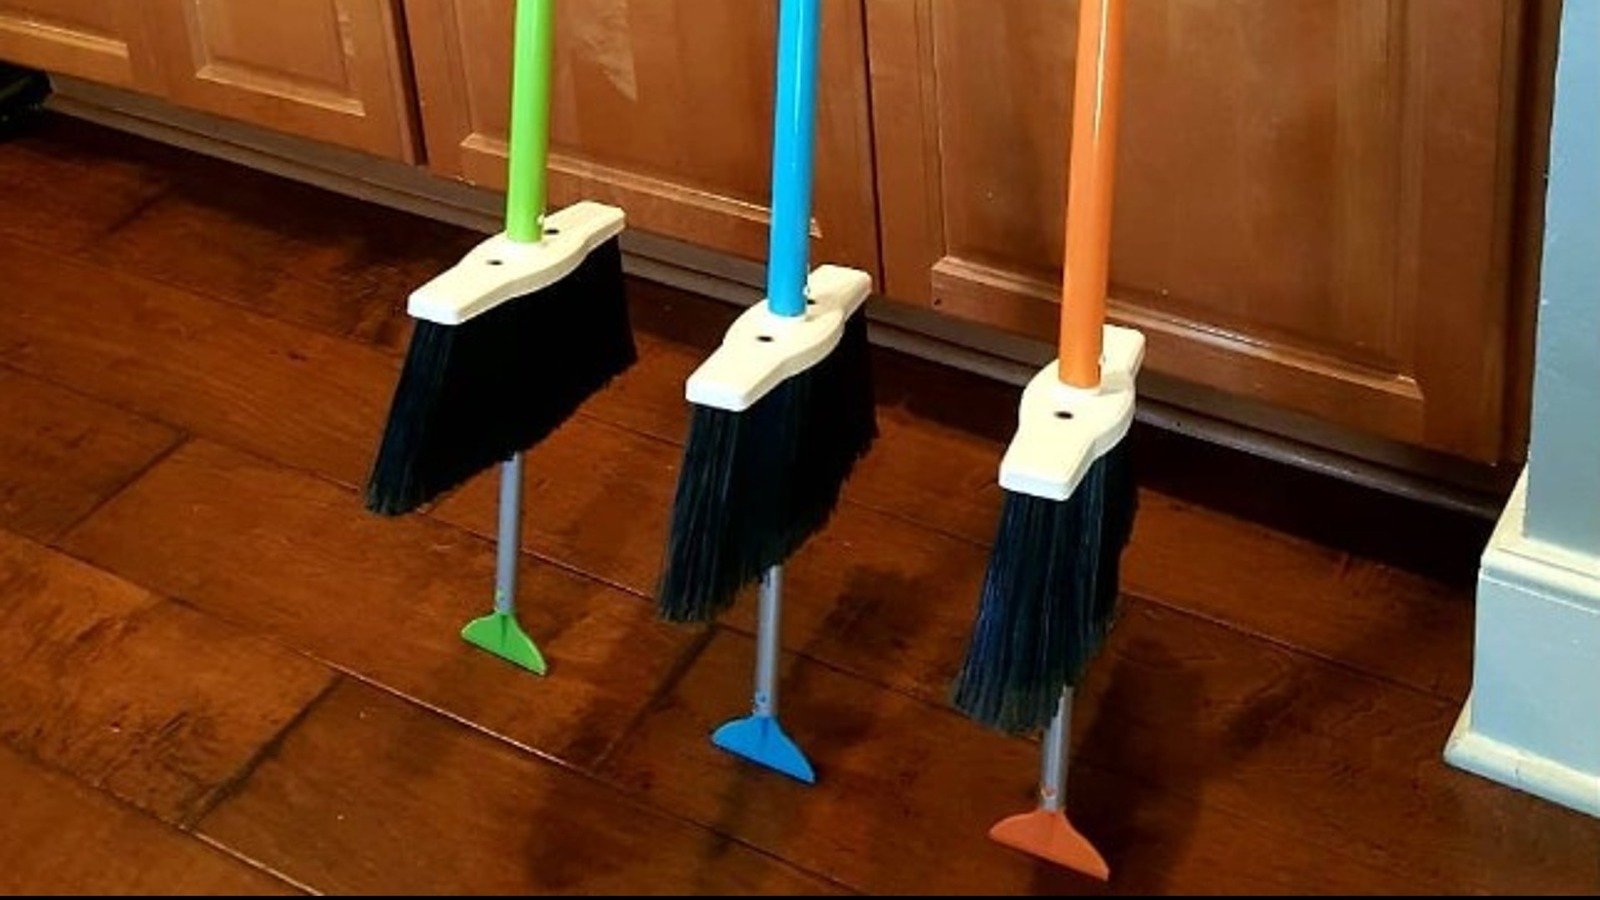 Plastic Broom: Options To Keep Your Bathroom Squeaky Clean - Times of India  (January, 2024)